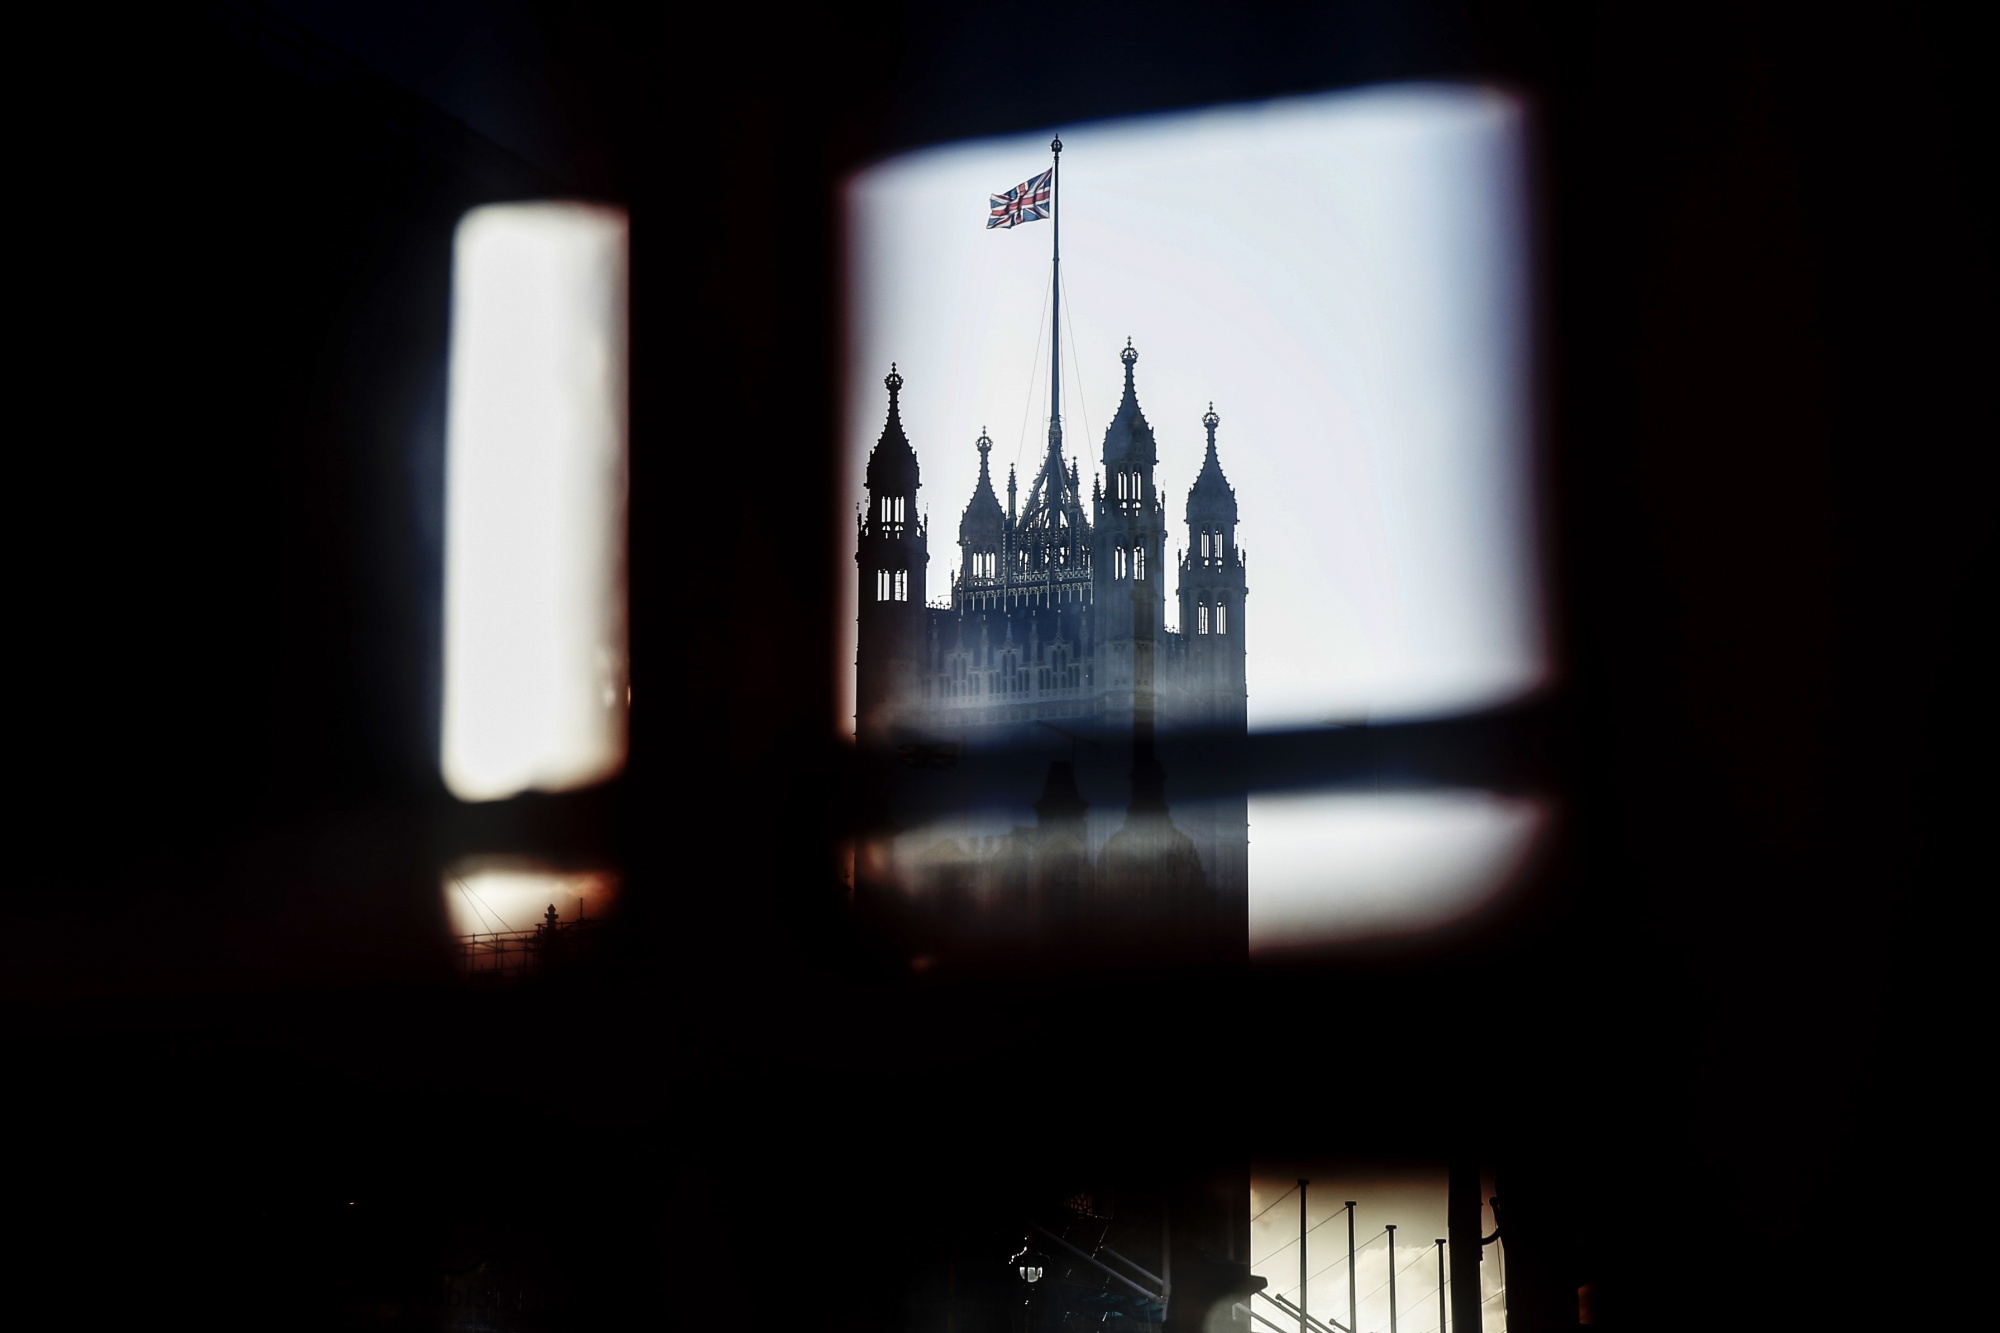 Window panes in a telephone box frame a view of the Victoria tower, part of the Houses of Parliament, in London.